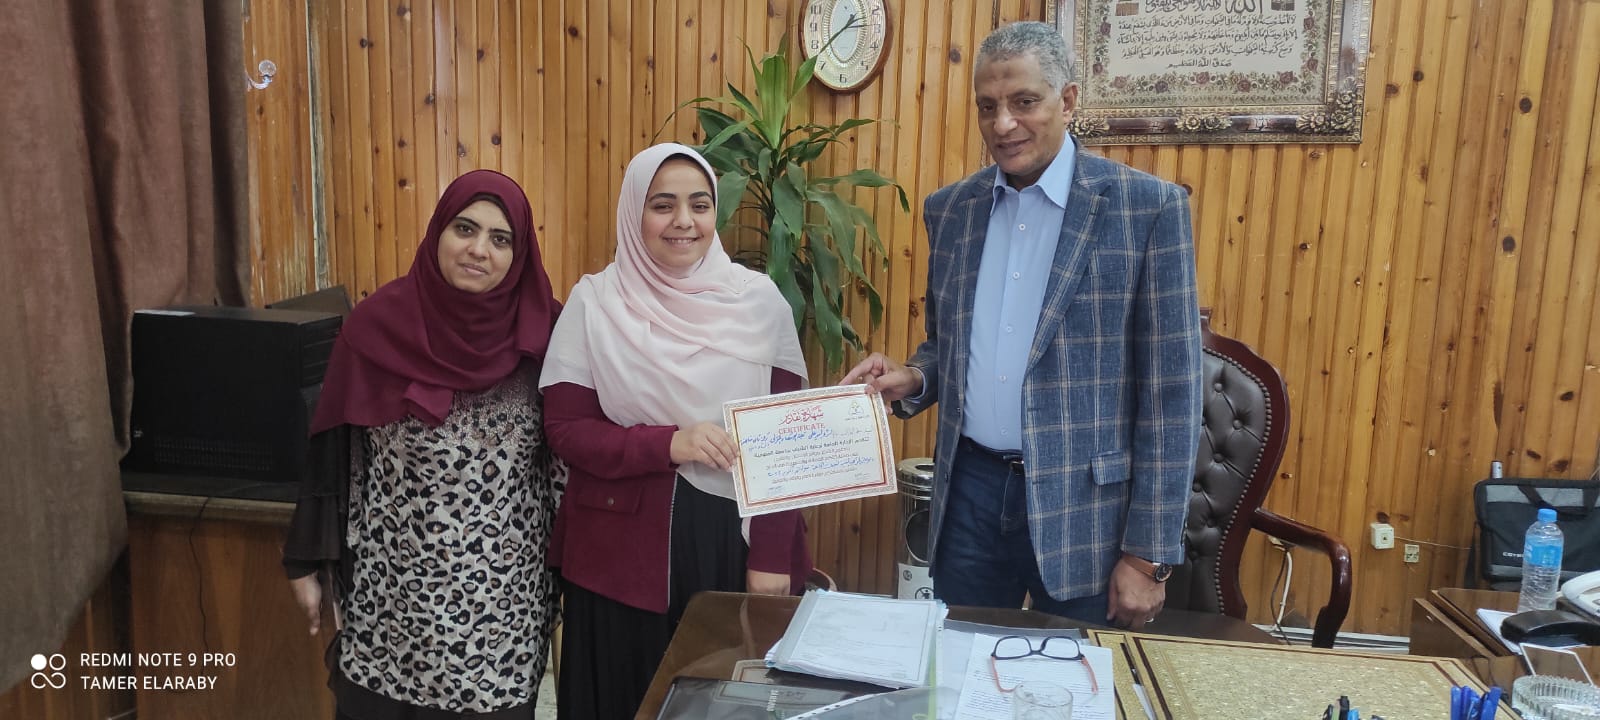 Honoring the student/Israa Al-Sayed Al-Nadi, who won second place equally in religious singing at the Artistic Talents Festival at the university level.